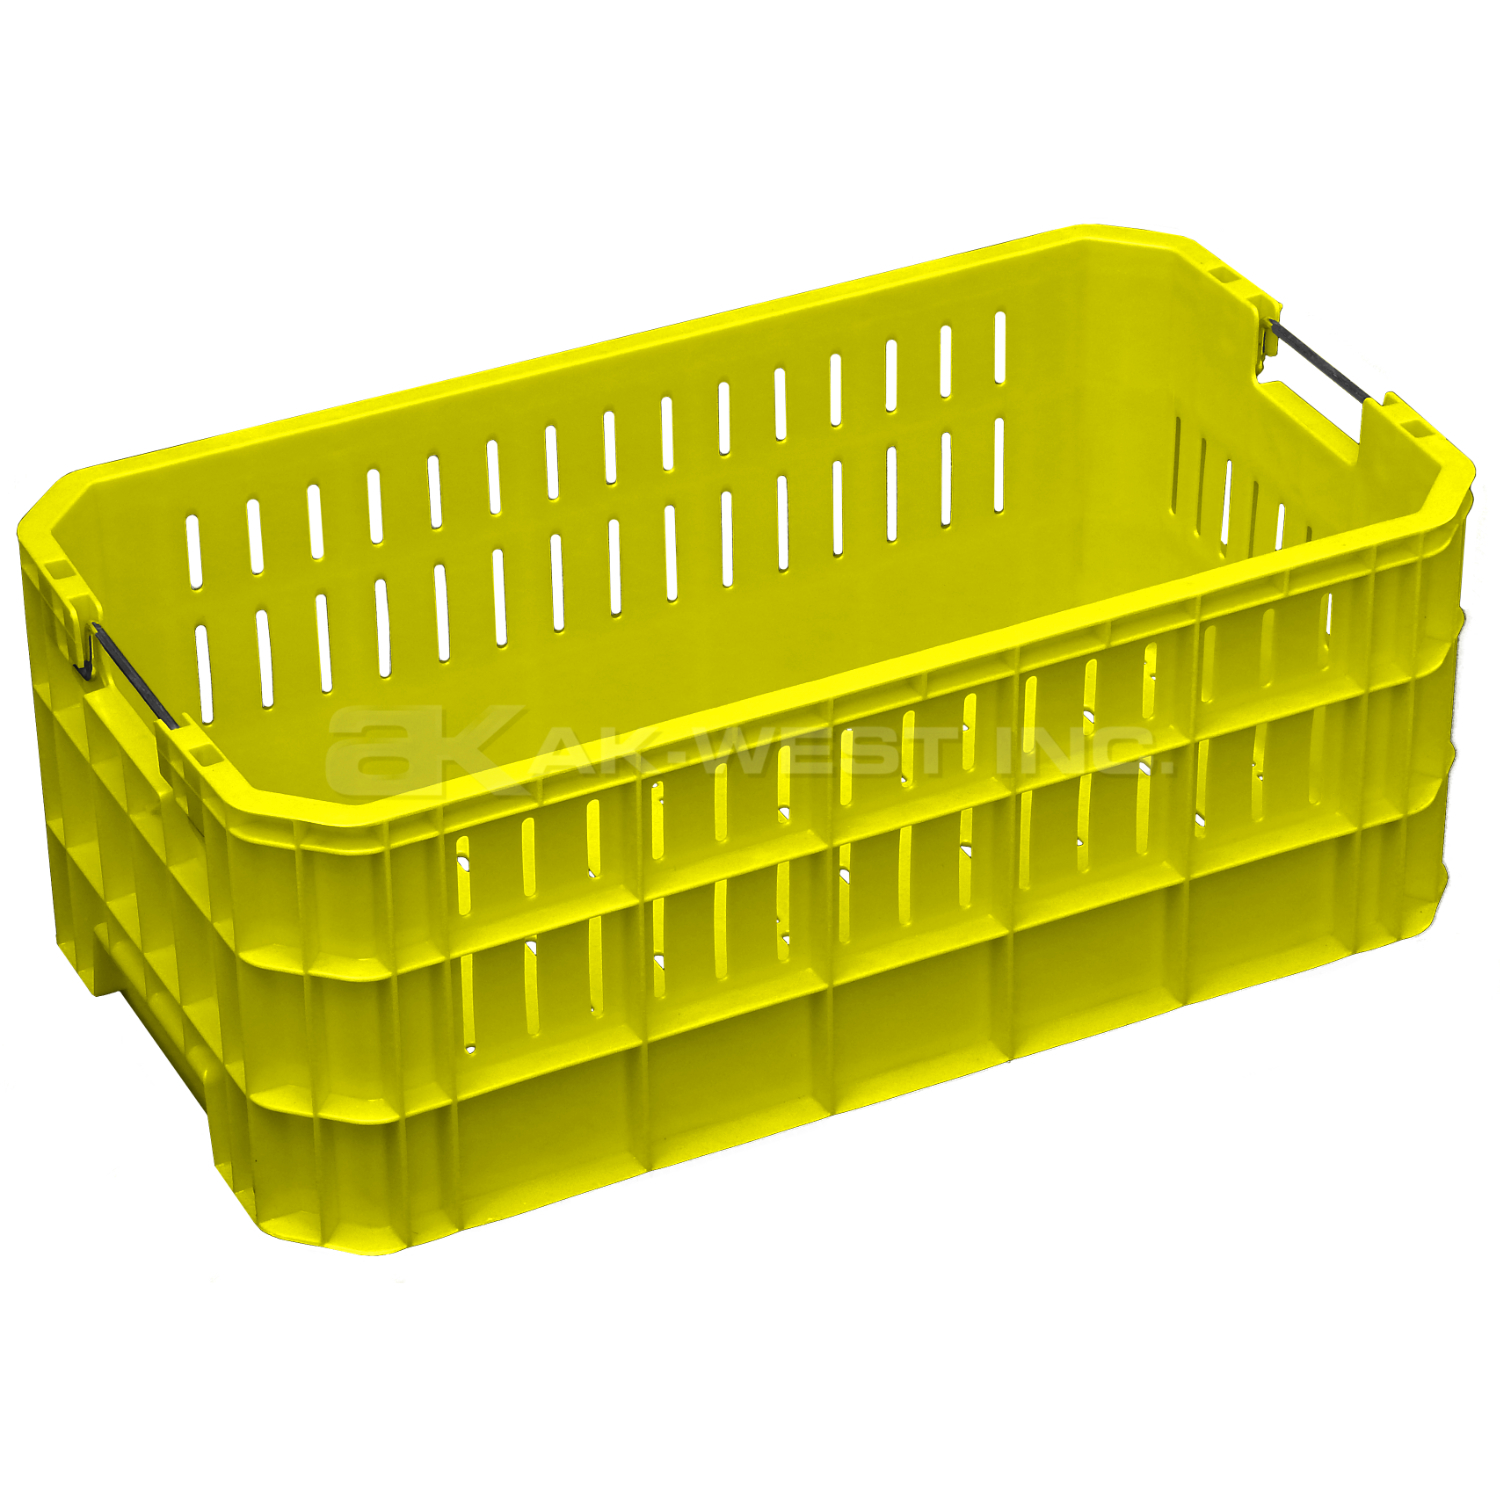 Yellow, 19"L x 11"W x 8"H Vented Handsfree Crate